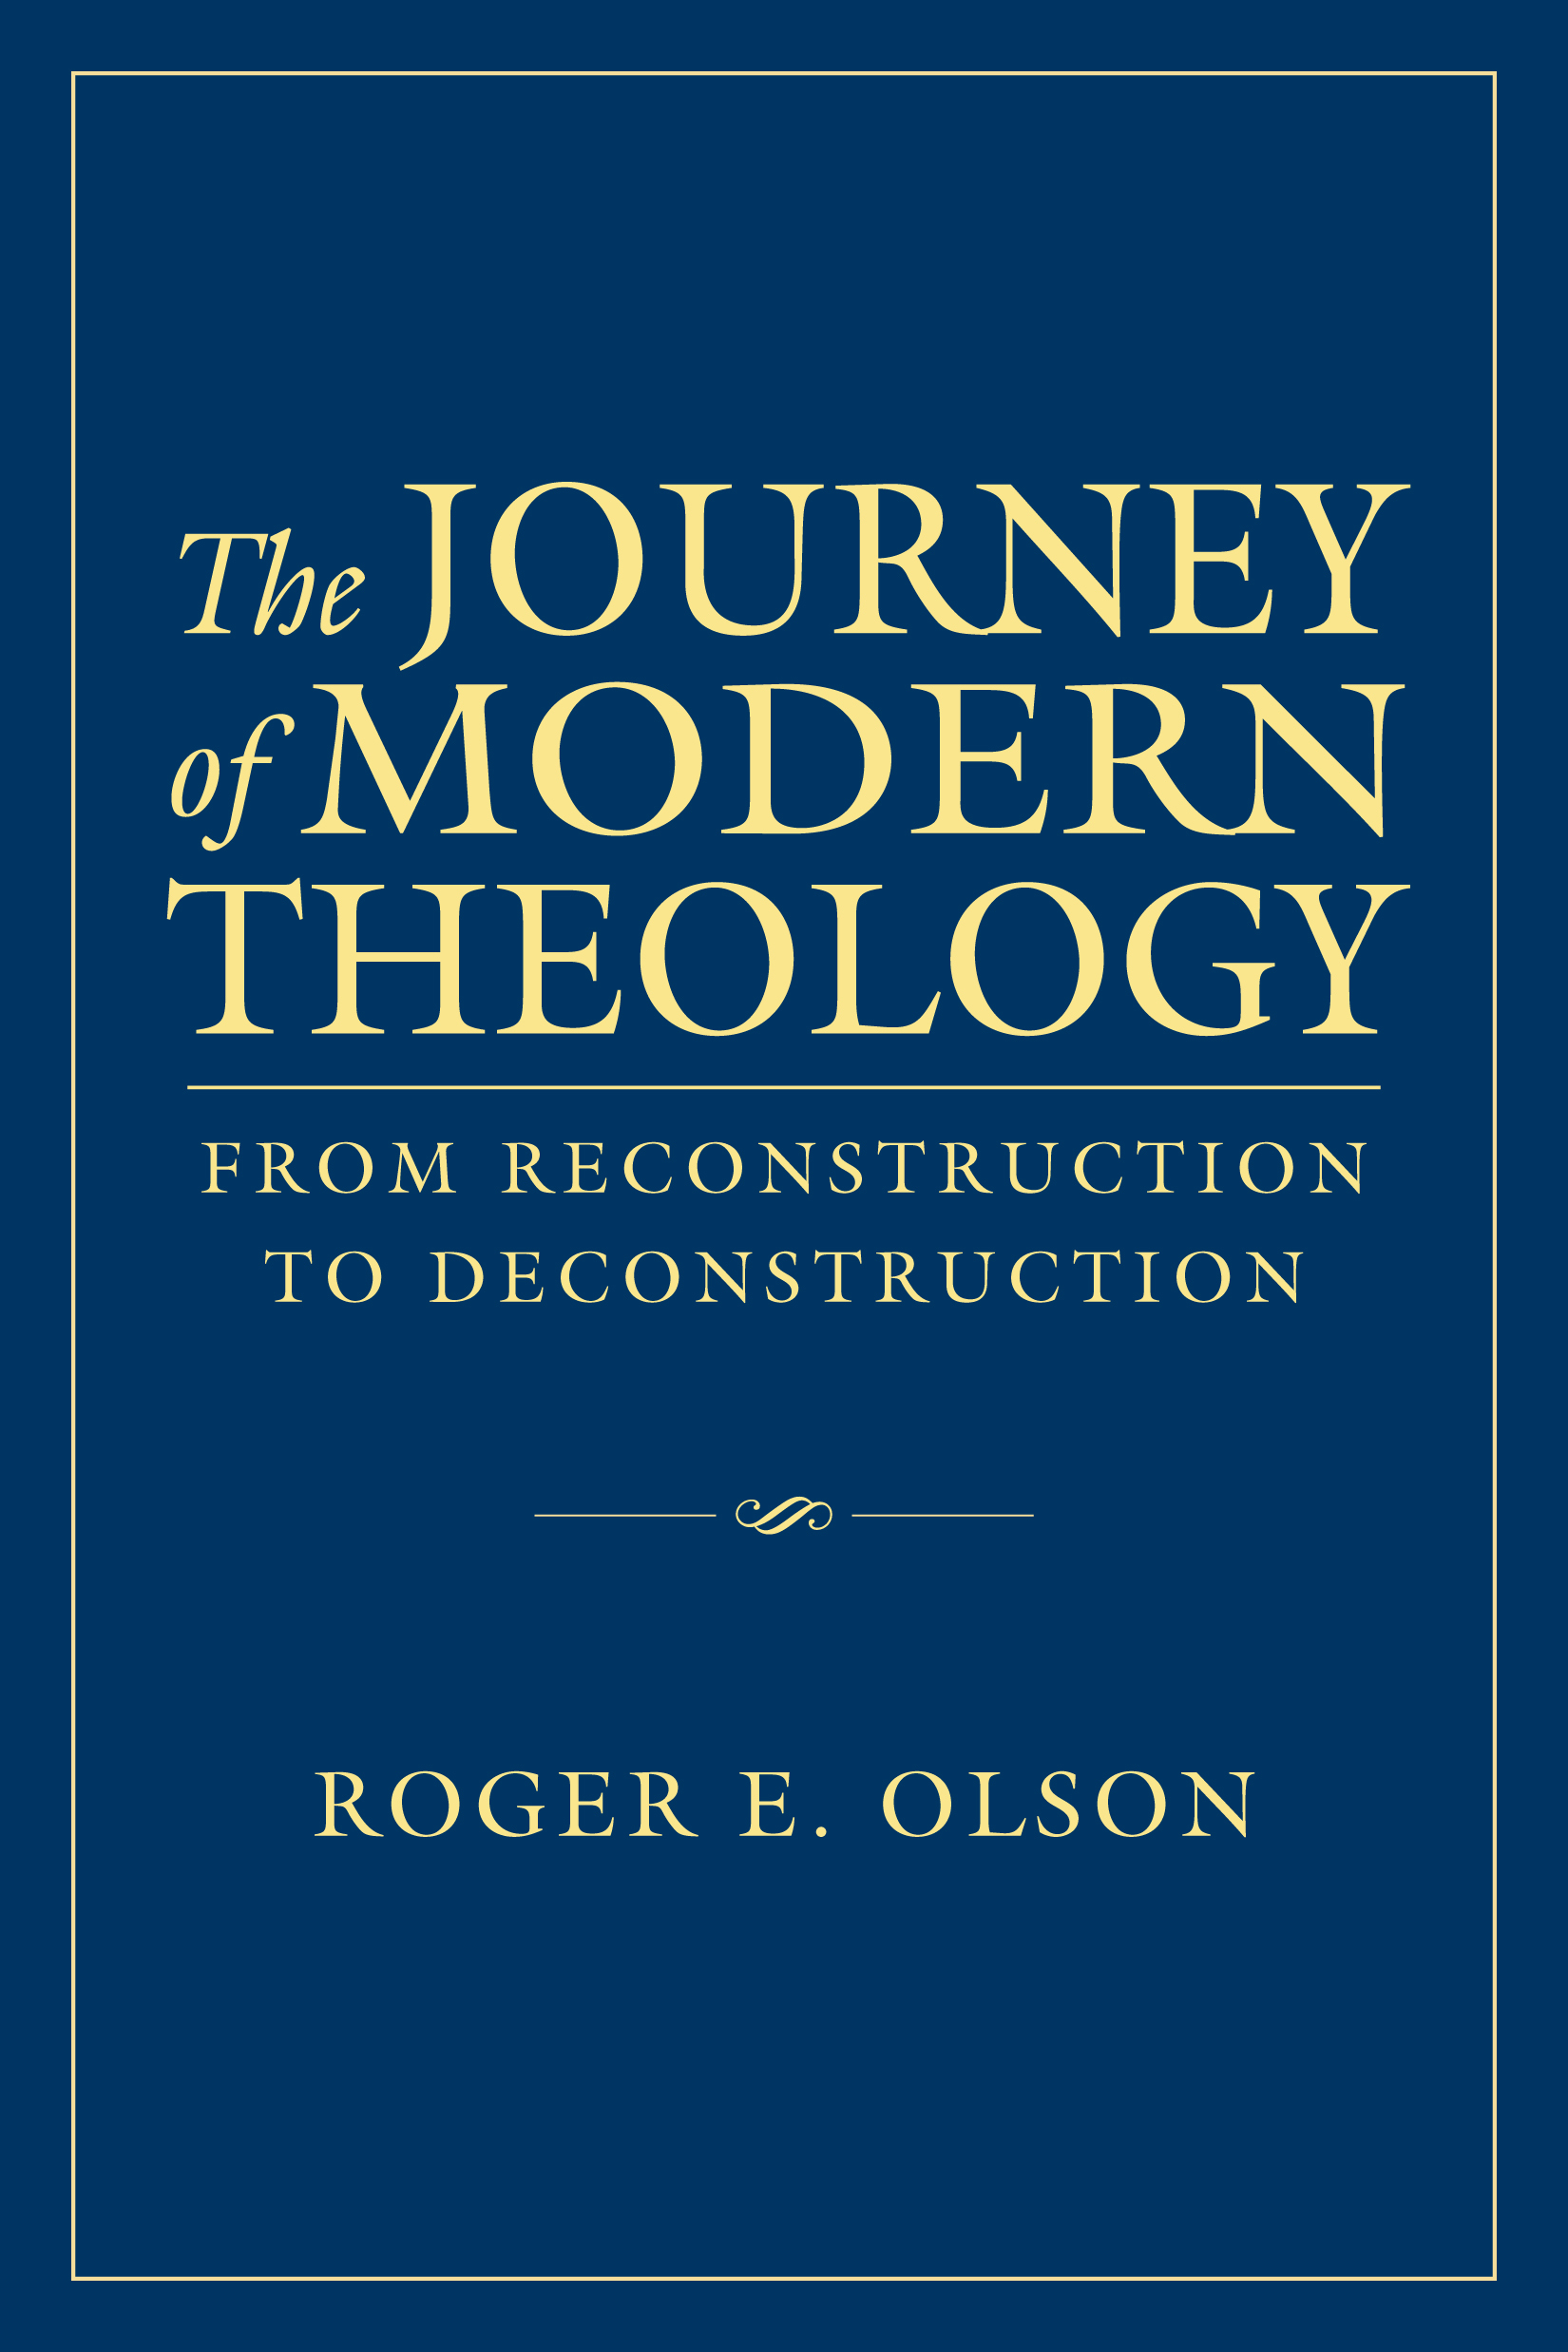 The Journey of Modern Theology From Reconstruction to Deconstruction by